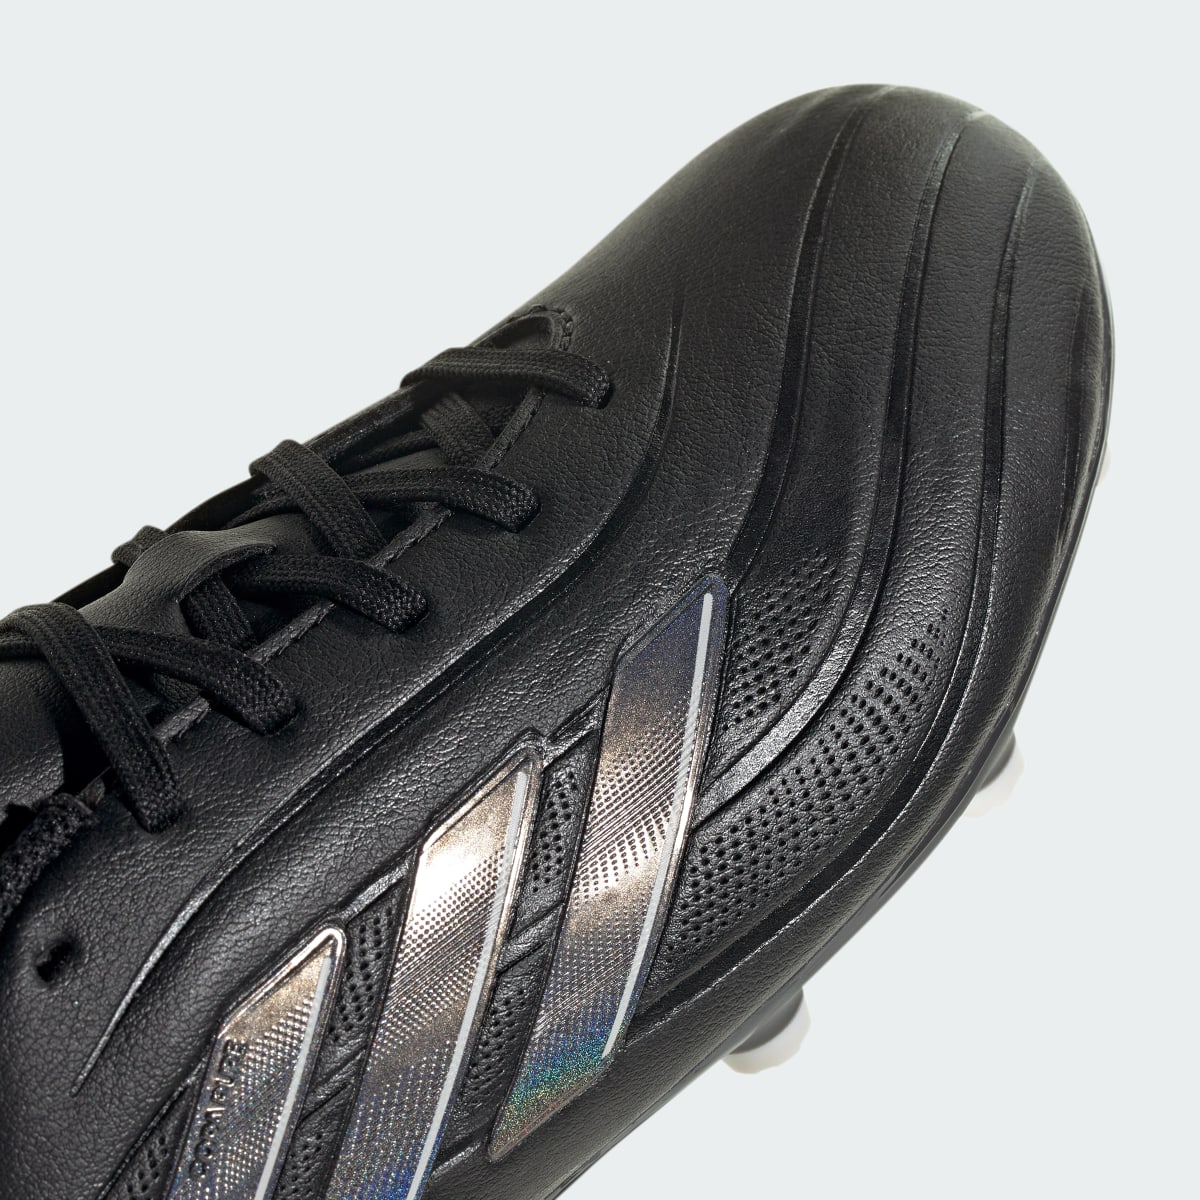 Adidas Copa Pure II League Firm Ground Cleats. 9